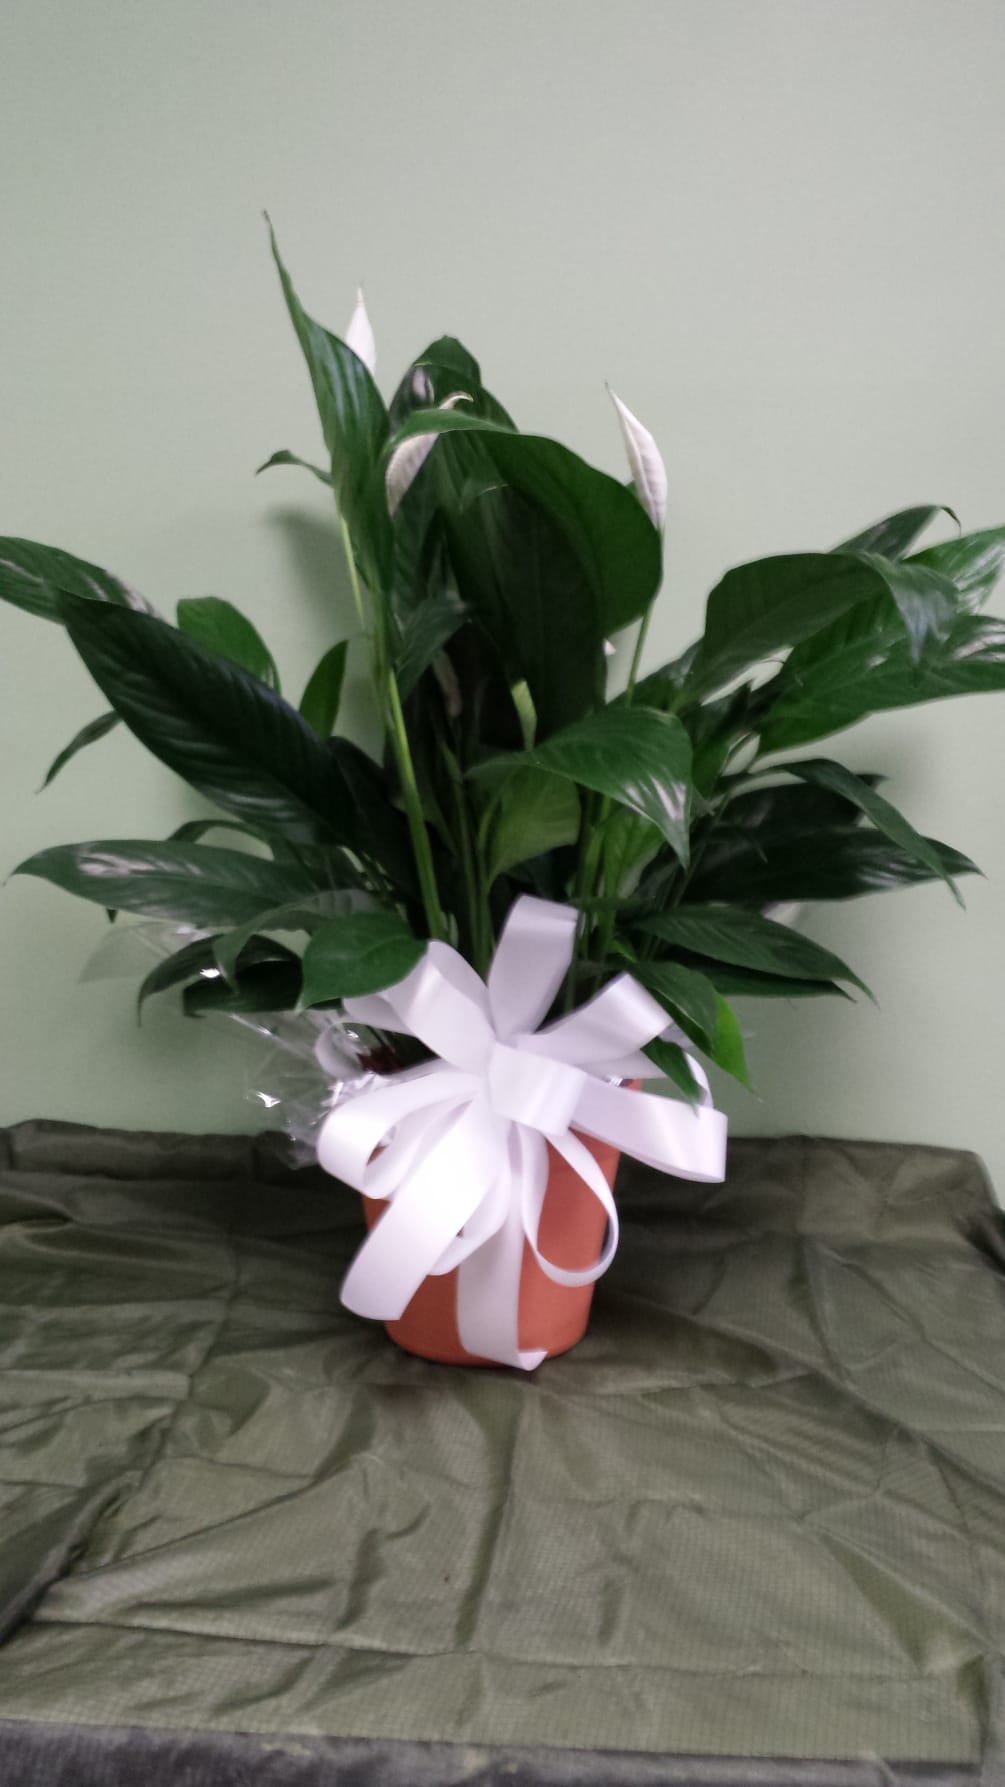 Easy care indoor plant, does not require bright light and does well